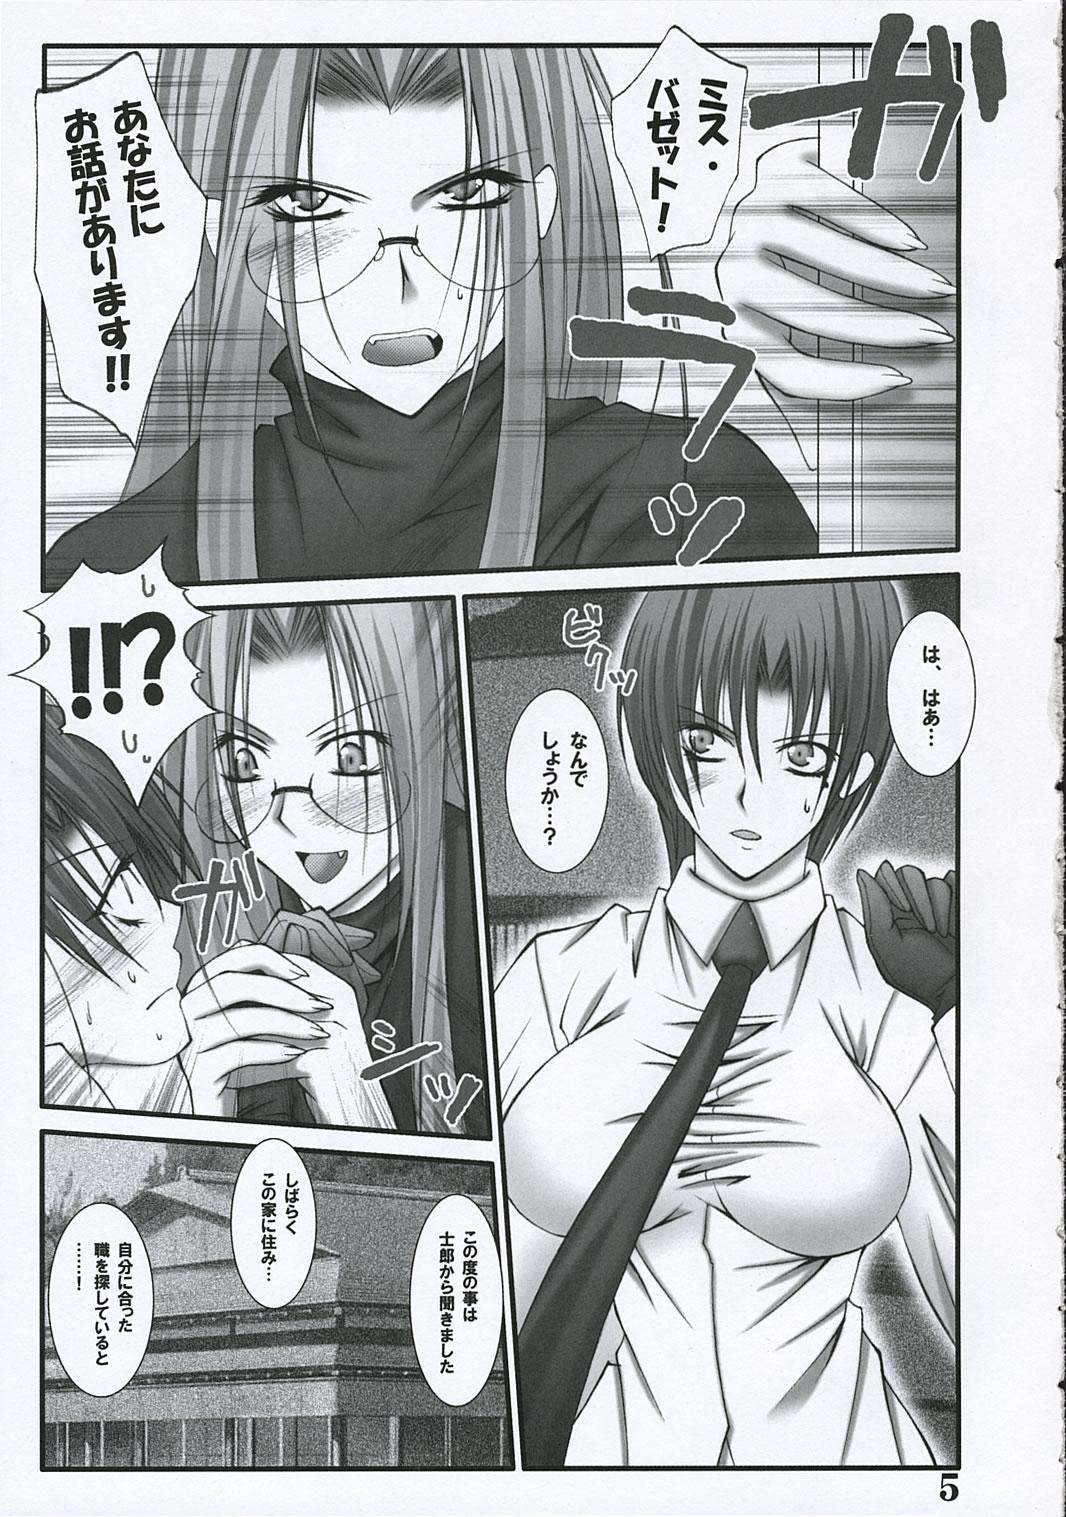 Pay SEVENTH HEAVENS - Fate hollow ataraxia Phat Ass - Page 4